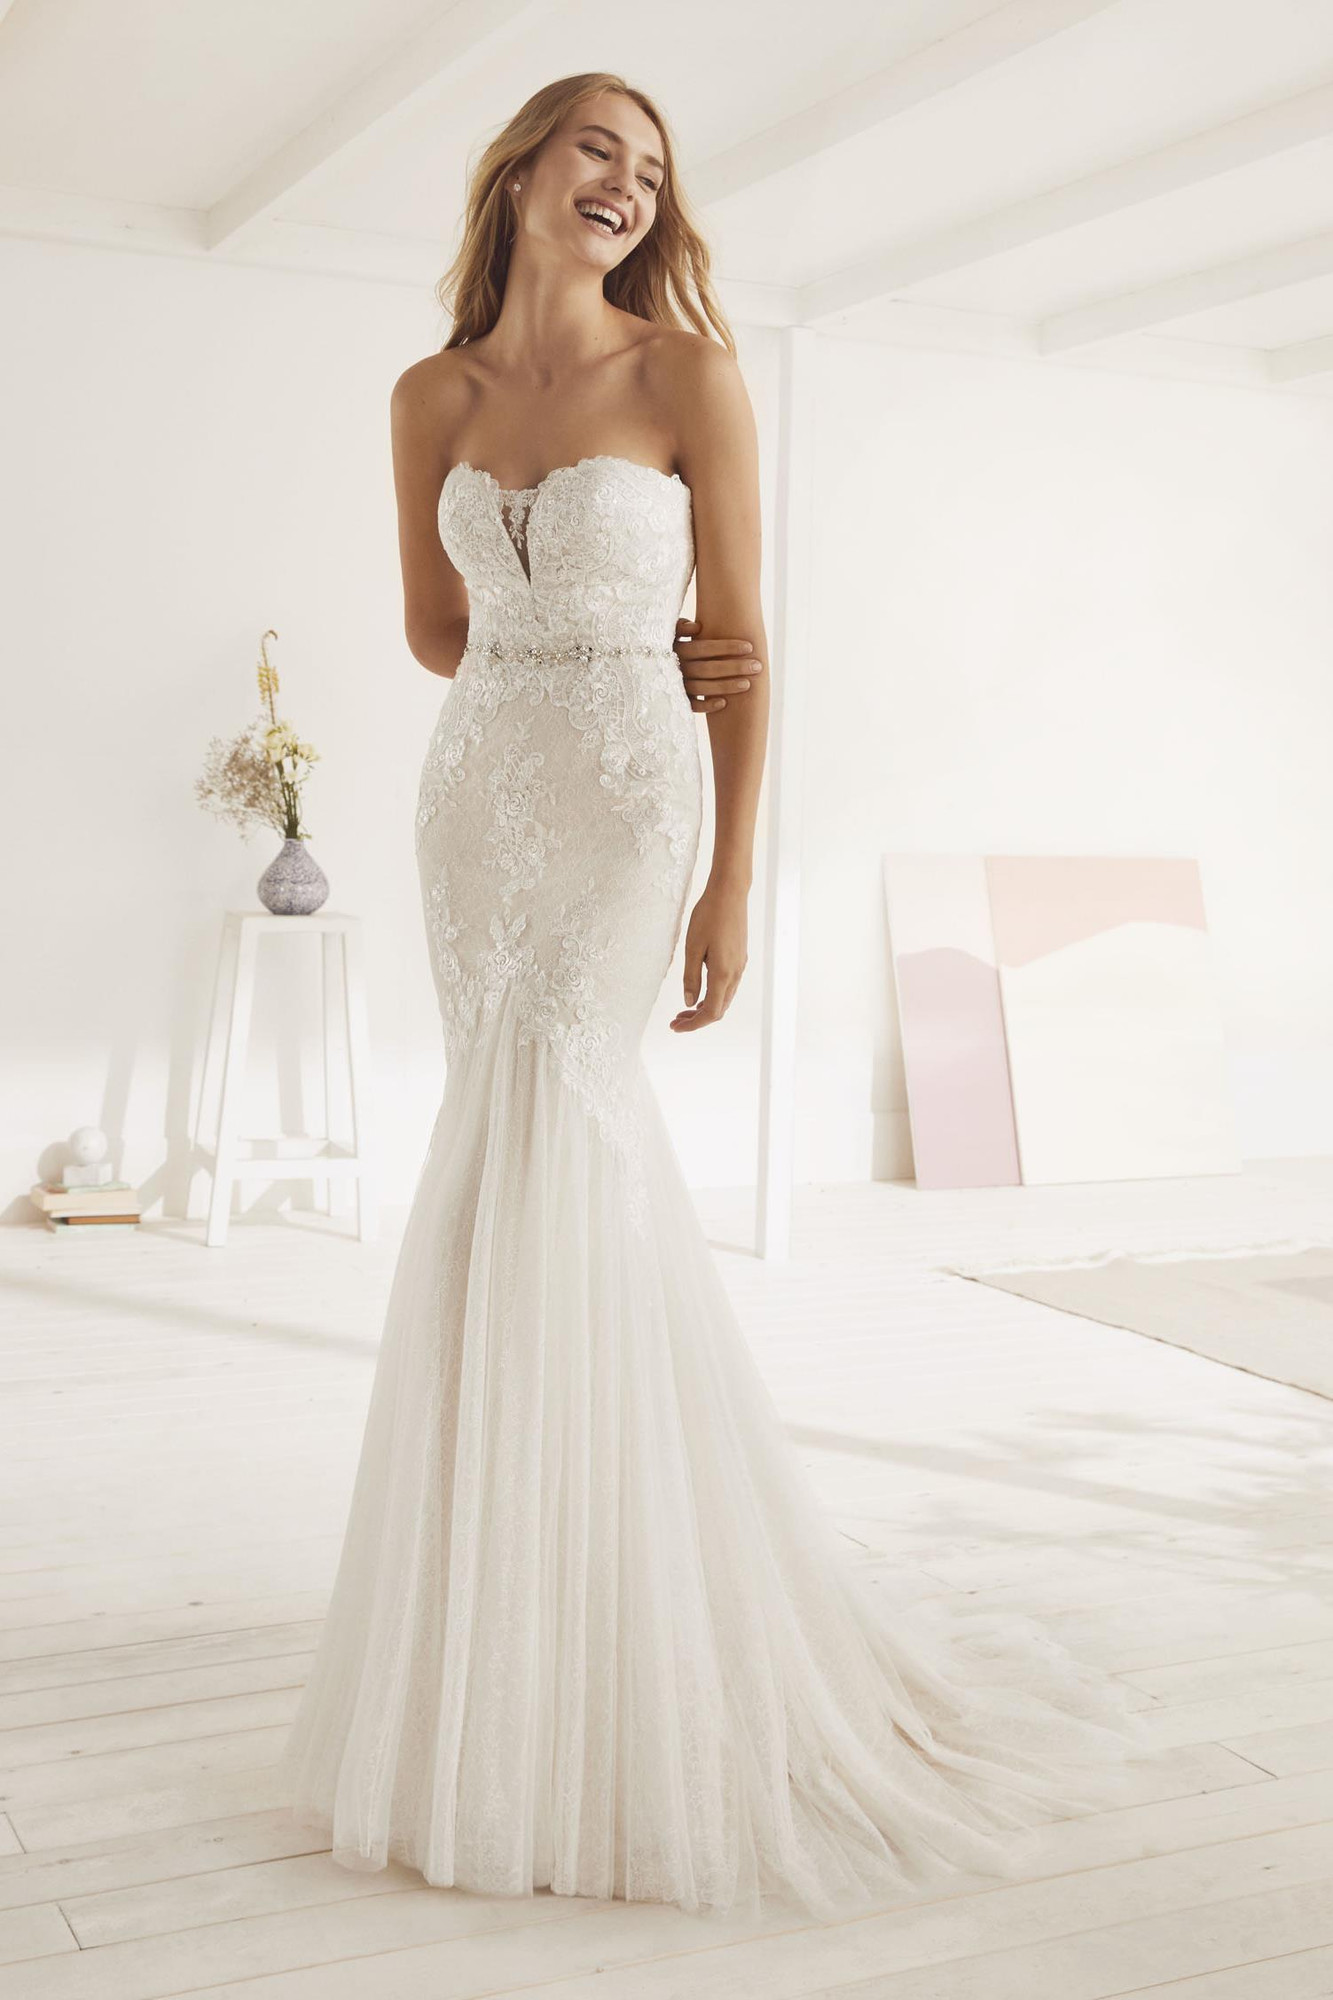 Oxana Wedding Dress from White One hitched.co.uk